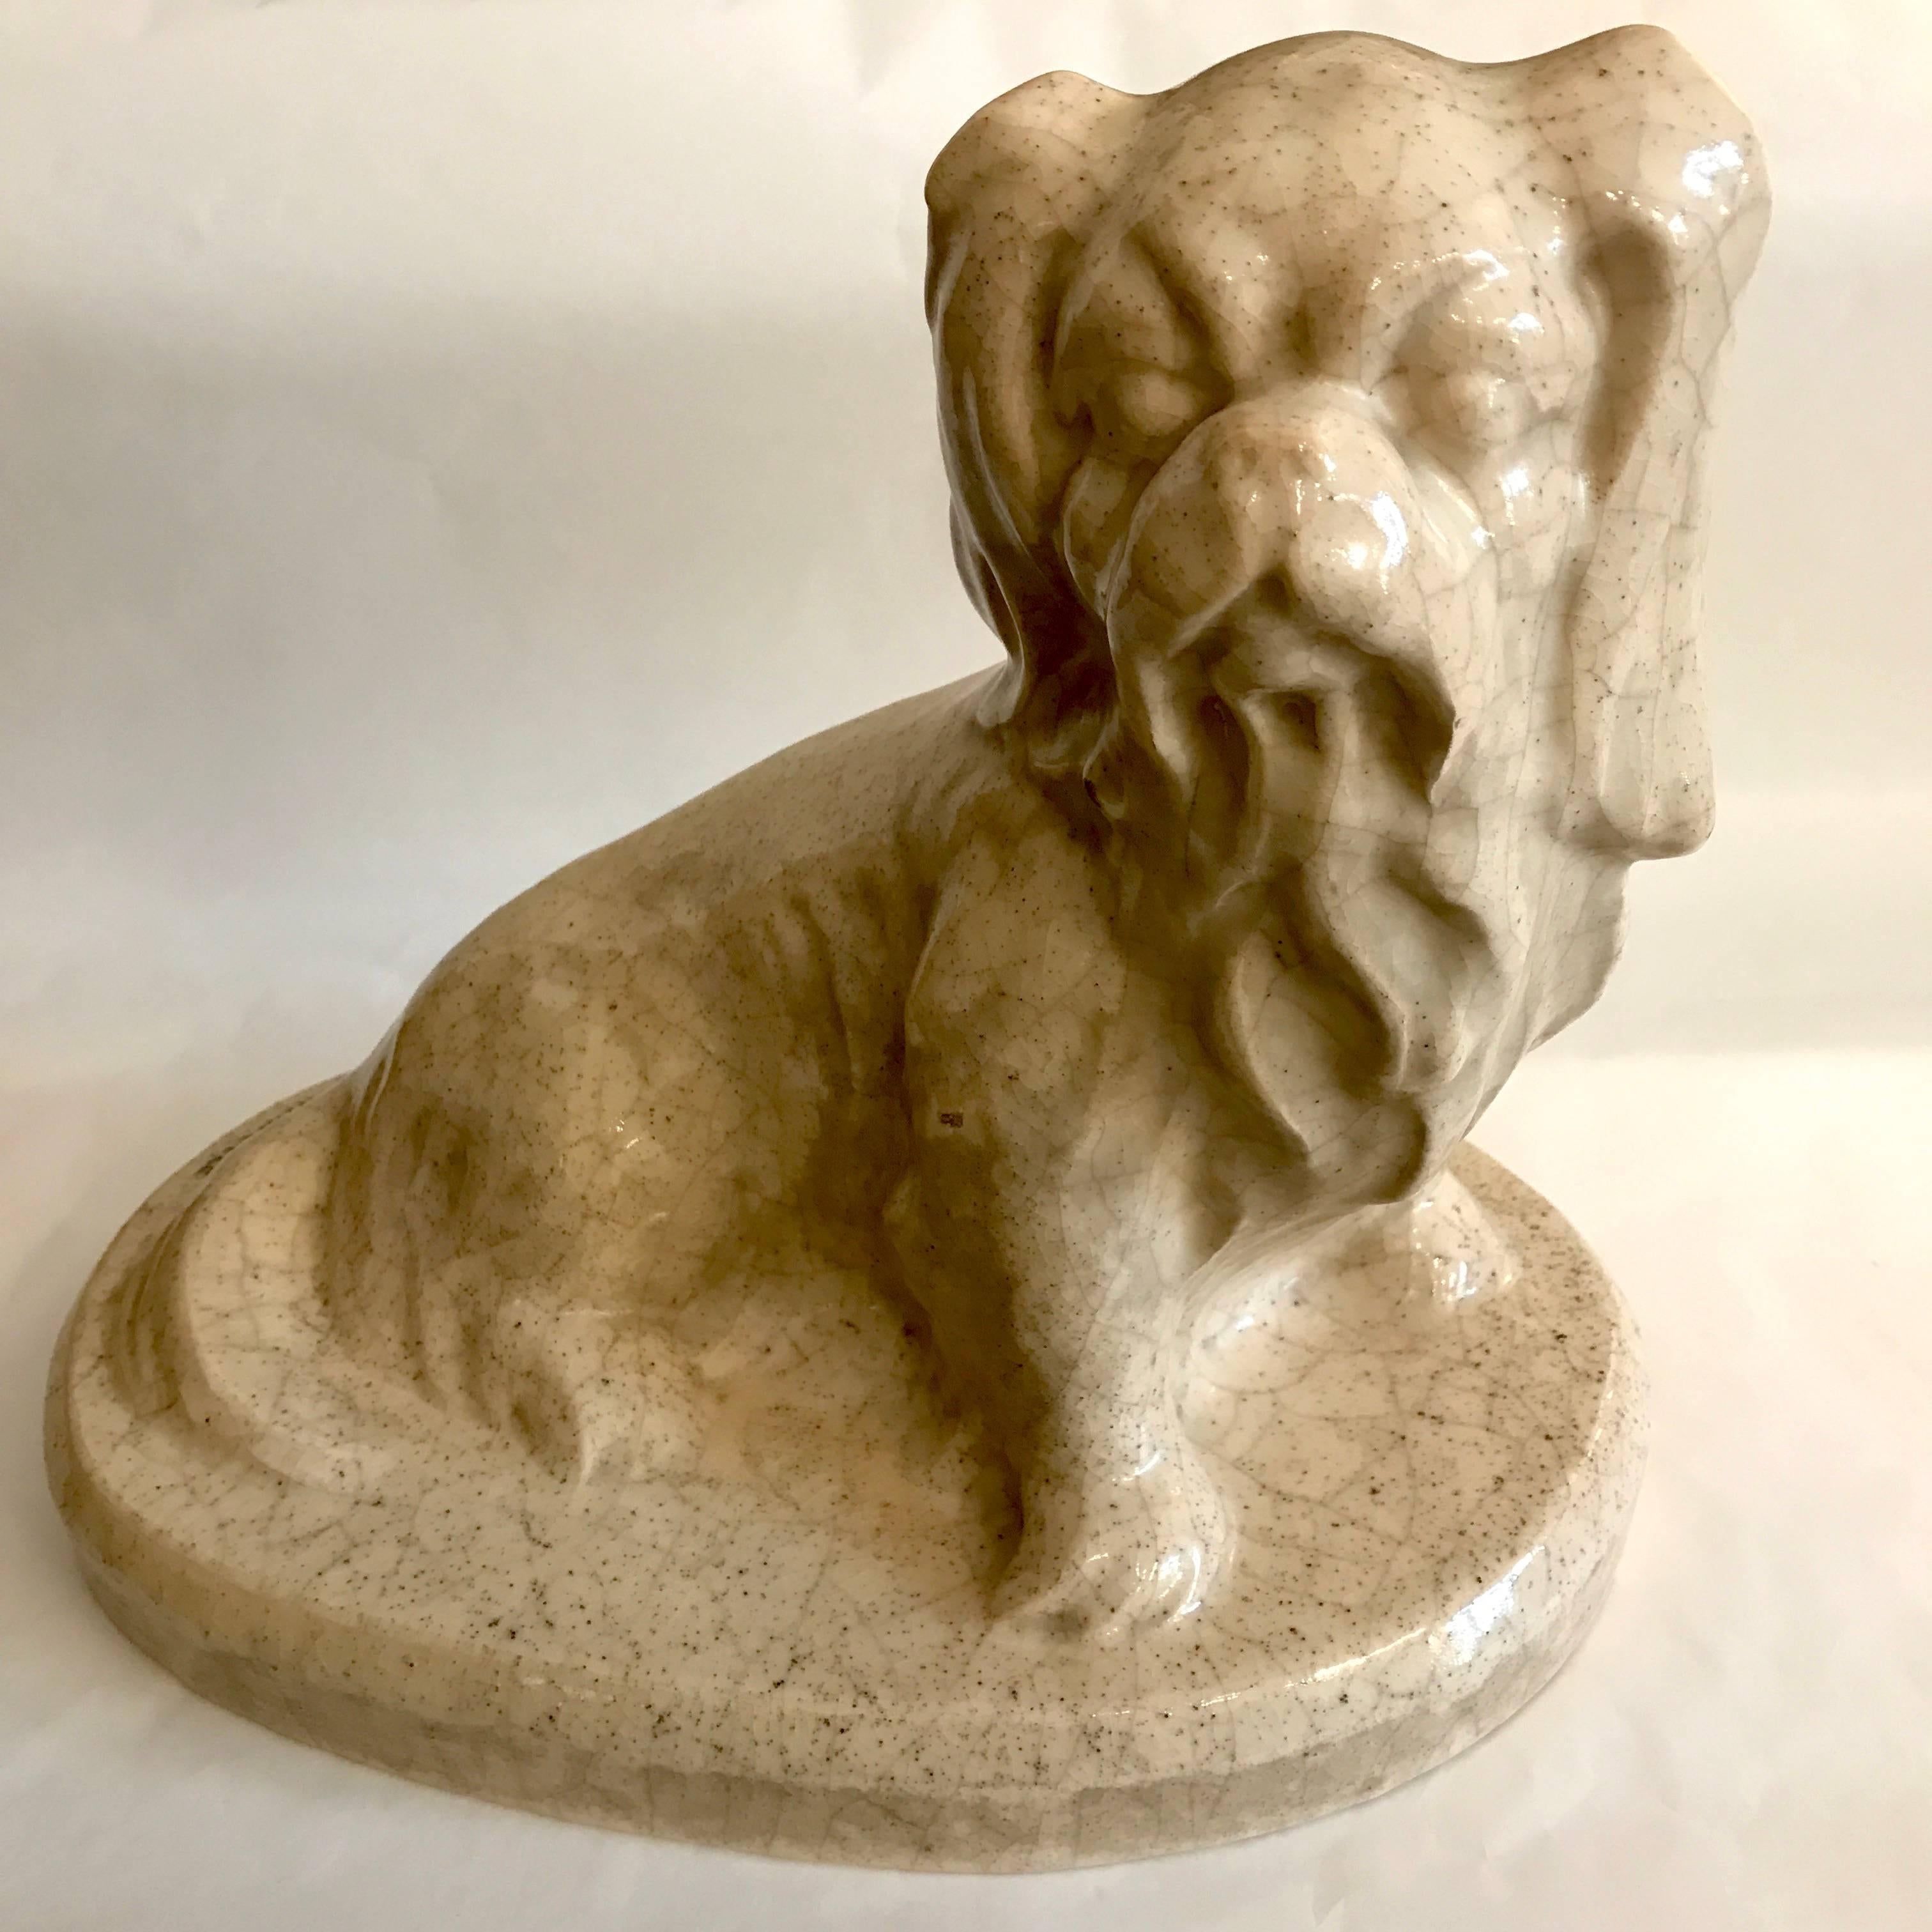 A Louis Fontinelle ceramic Art Deco Pekingese dog figure, in cream colored crackle glazed earthenware, depicting a Pekingese dog sitting on its hind legs, on a oval plinth, signed on the back L. FONTINELLE ; by the French artist (Paris